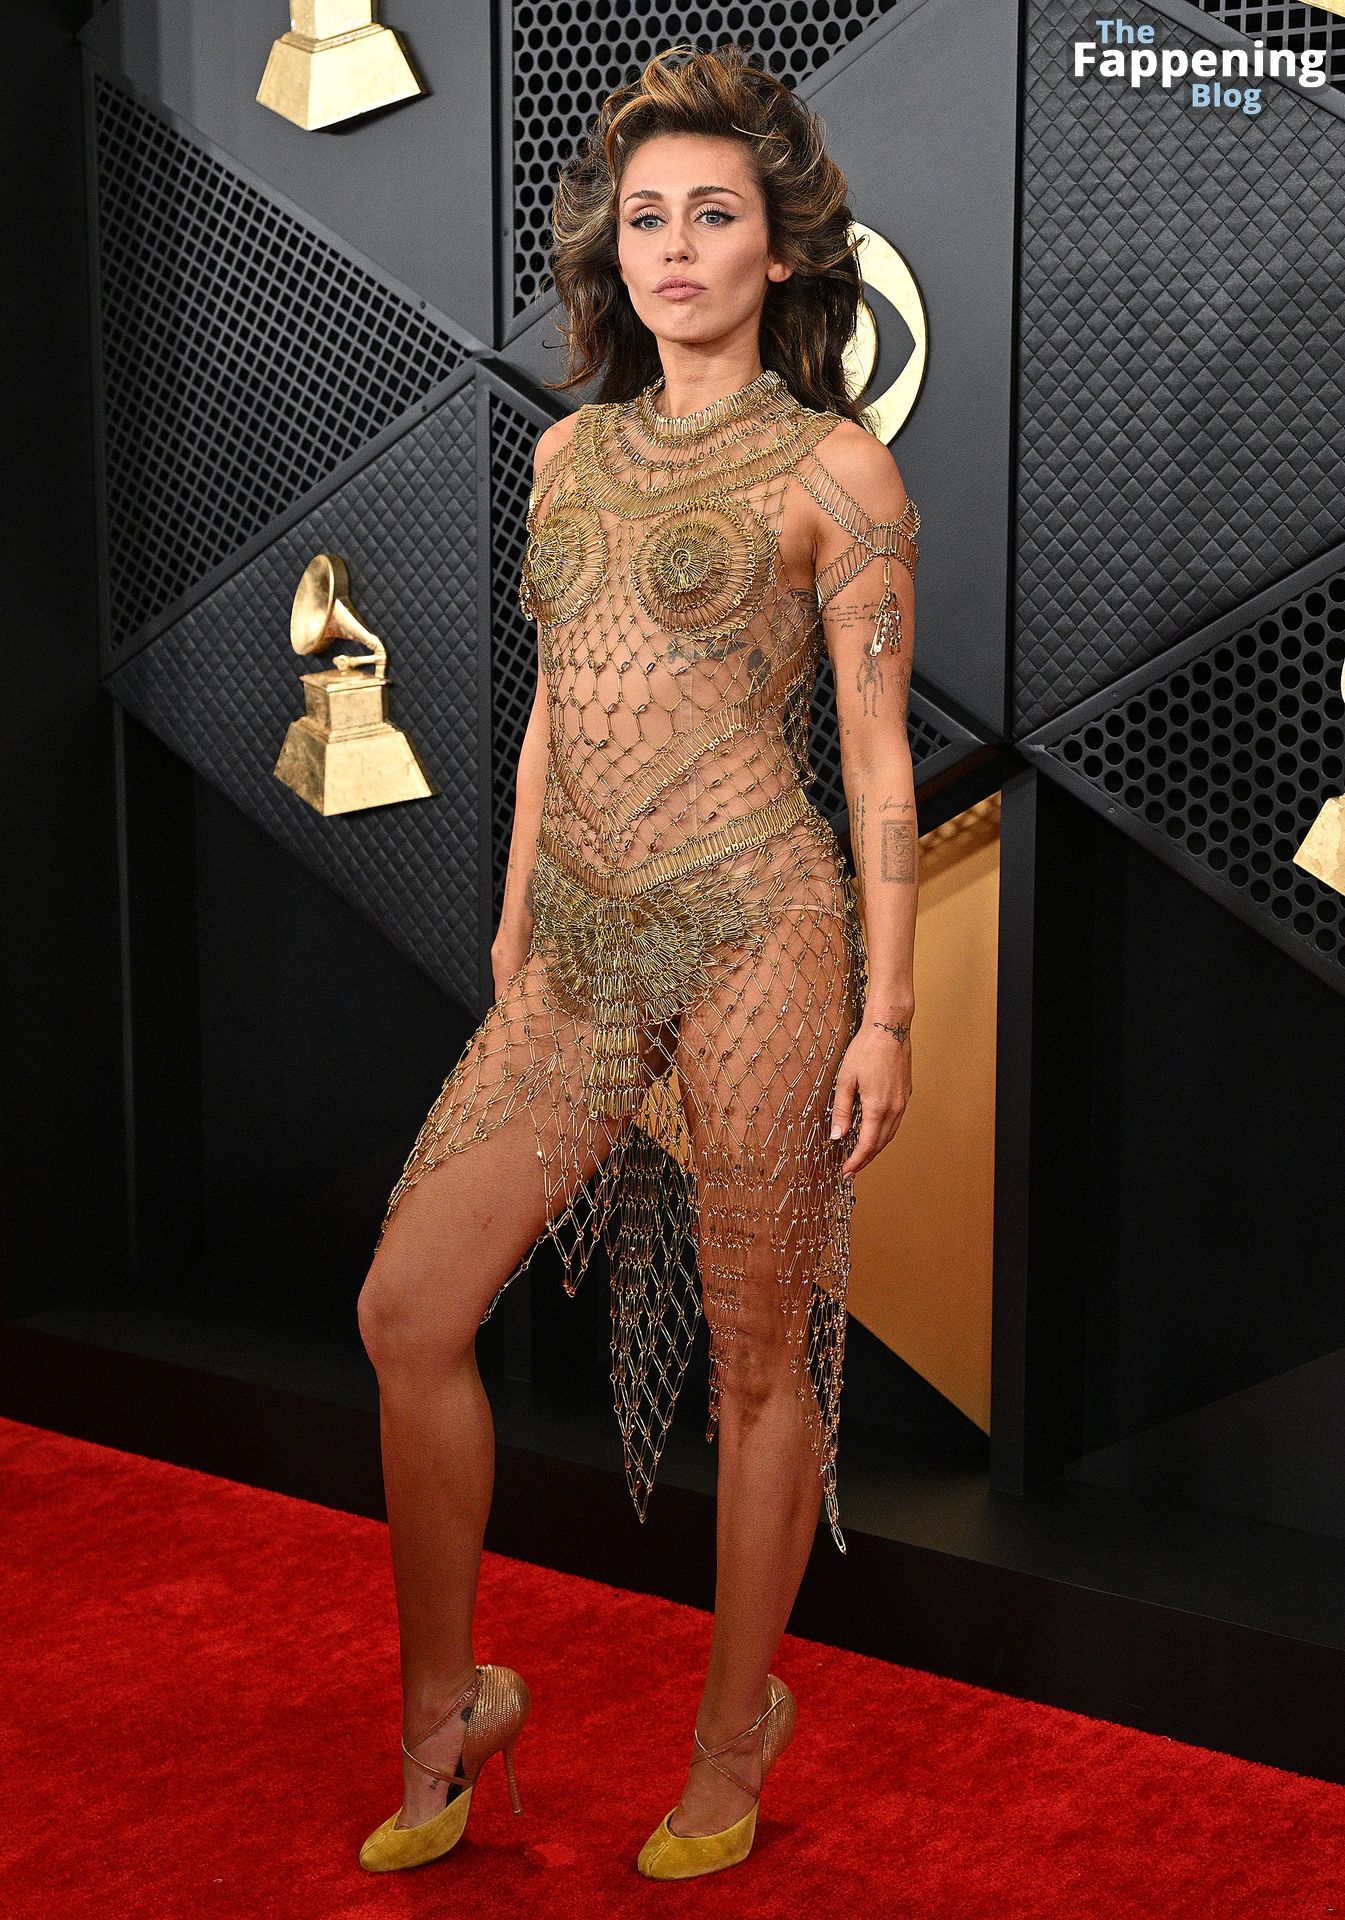 Miley Cyrus Looks Hot Without Underwear at the 66th Annual GRAMMY Awards (112 Photos)